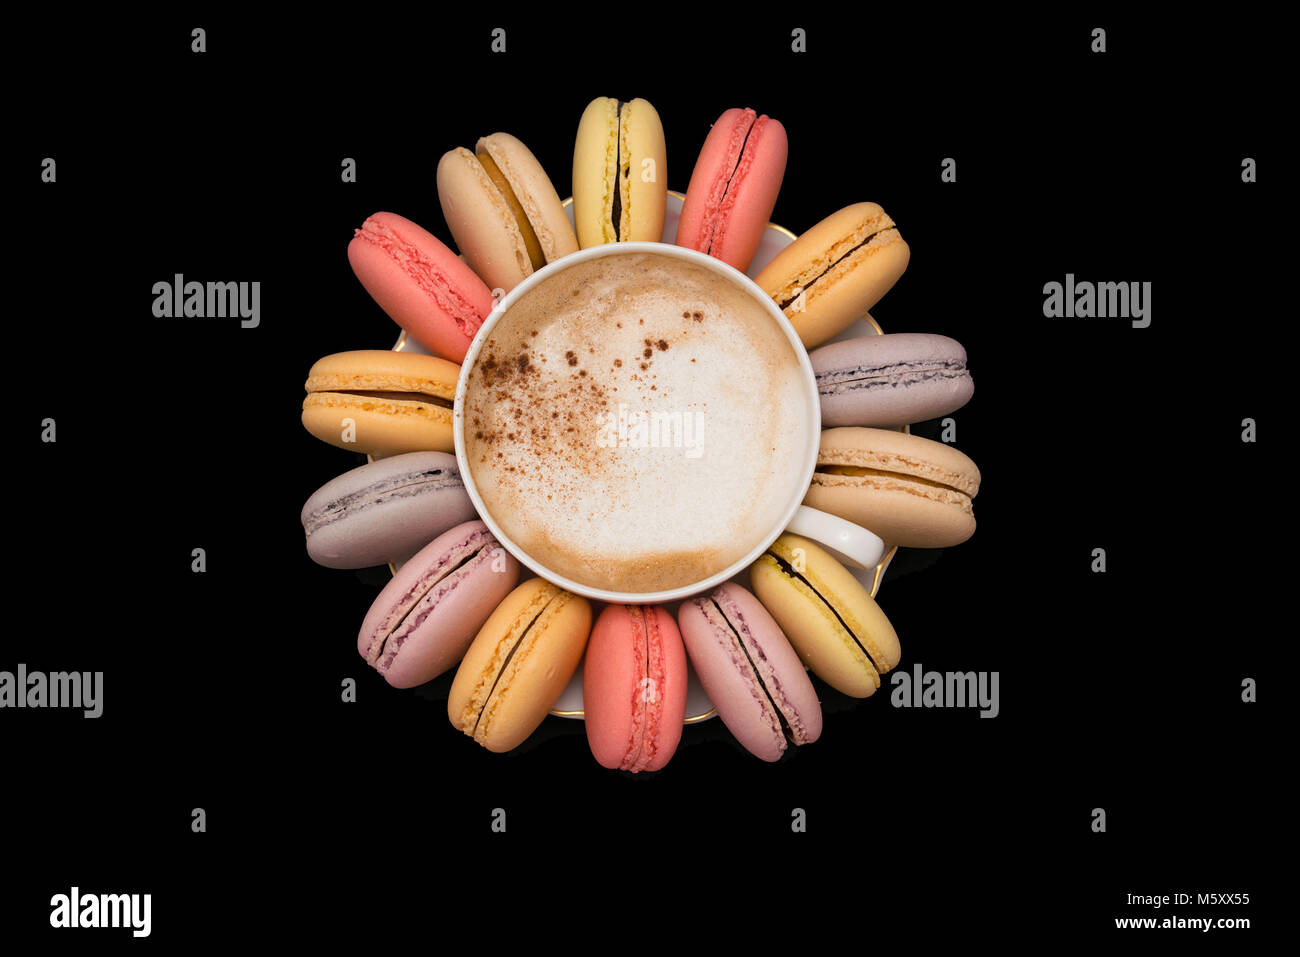 Pastel macarons around a coffee cup Stock Photo